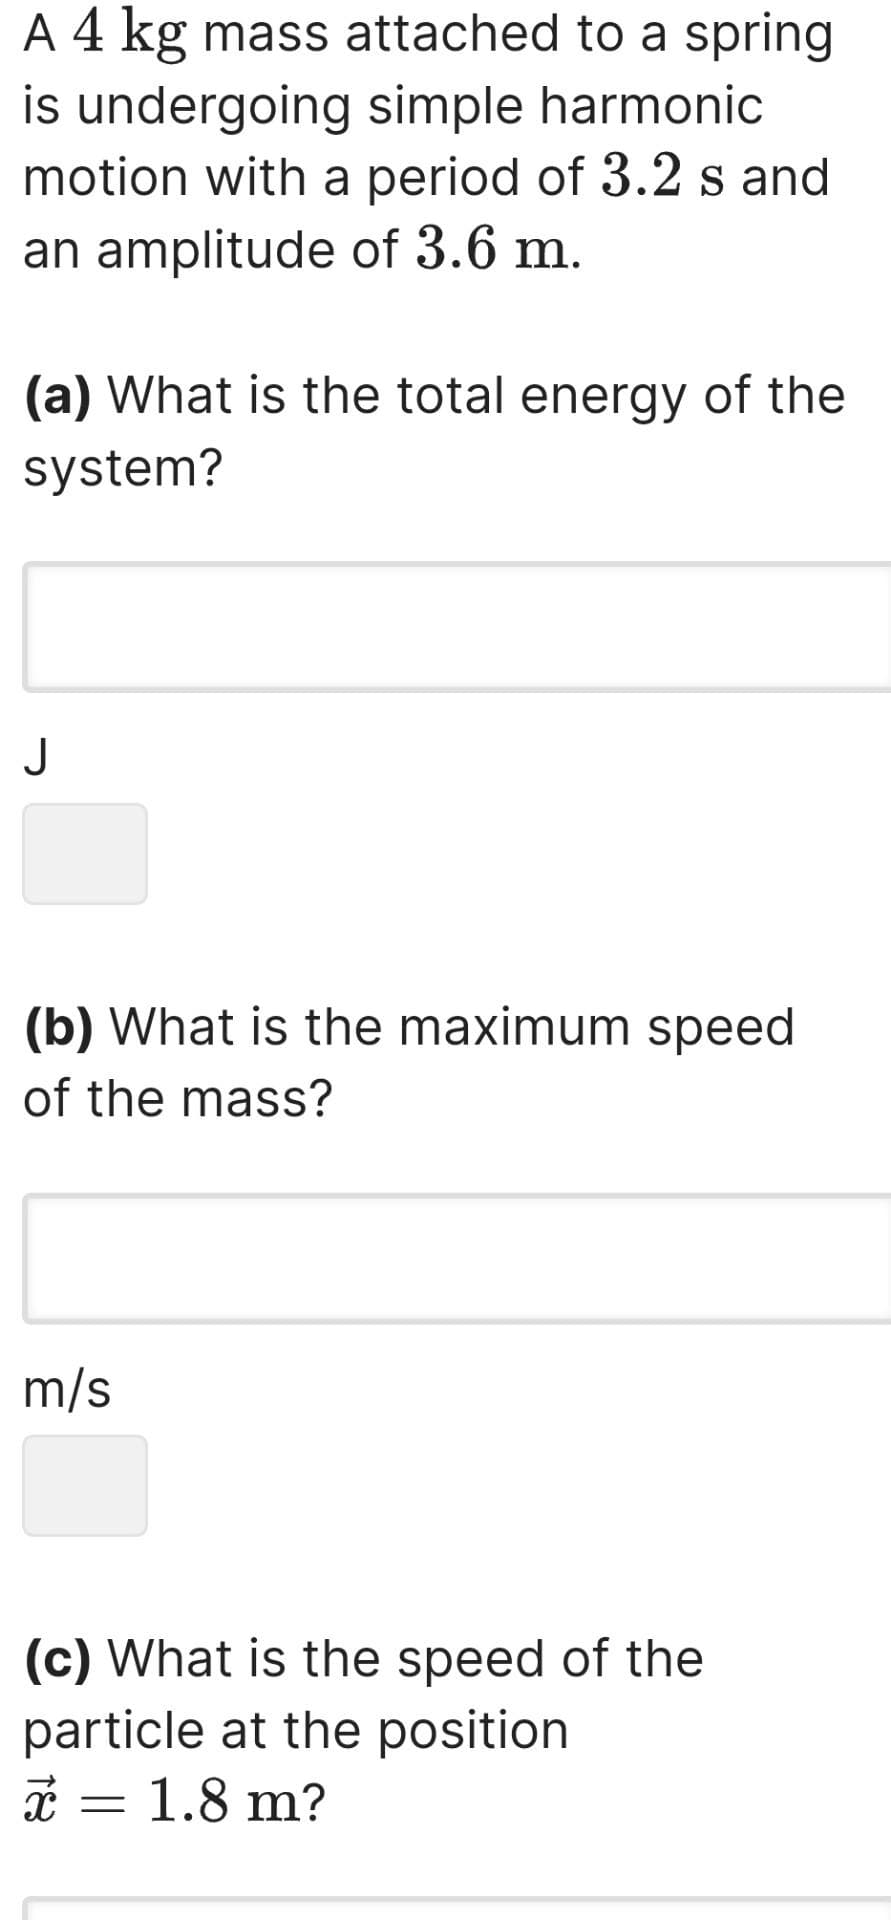 A 4 kg mass attached to a spring
is undergoing simple harmonic
motion with a period of 3.2 s and
an amplitude of 3.6 m.
(a) What is the total energy of the
system?
J
(b) What is the maximum speed
of the mass?
m/s
(c) What is the speed of the
particle at the position
X x = 1.8 m?